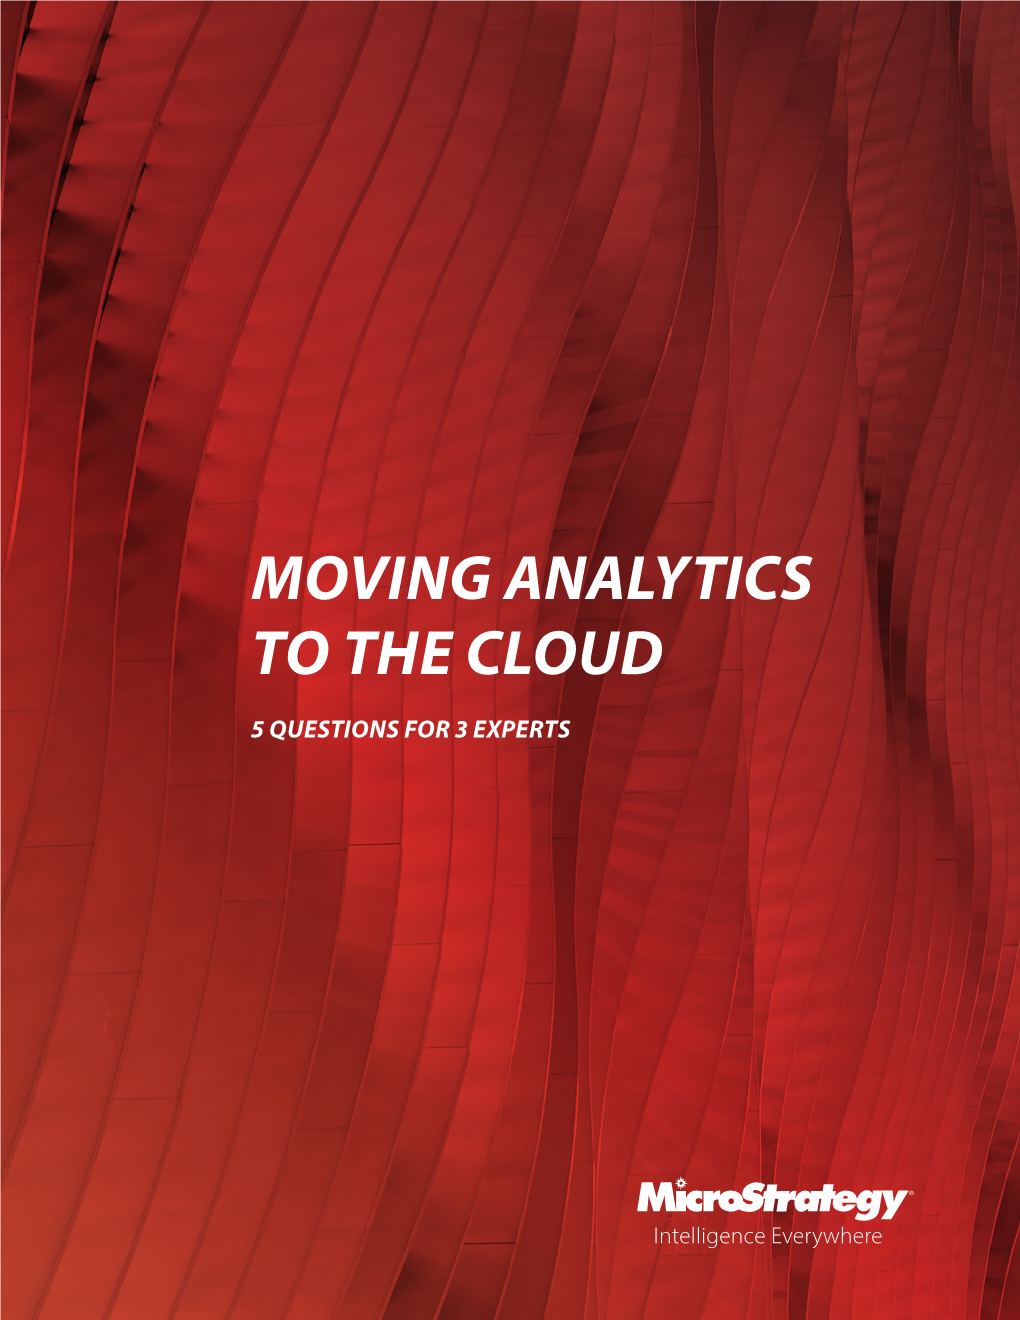 Moving Analytics to the Cloud